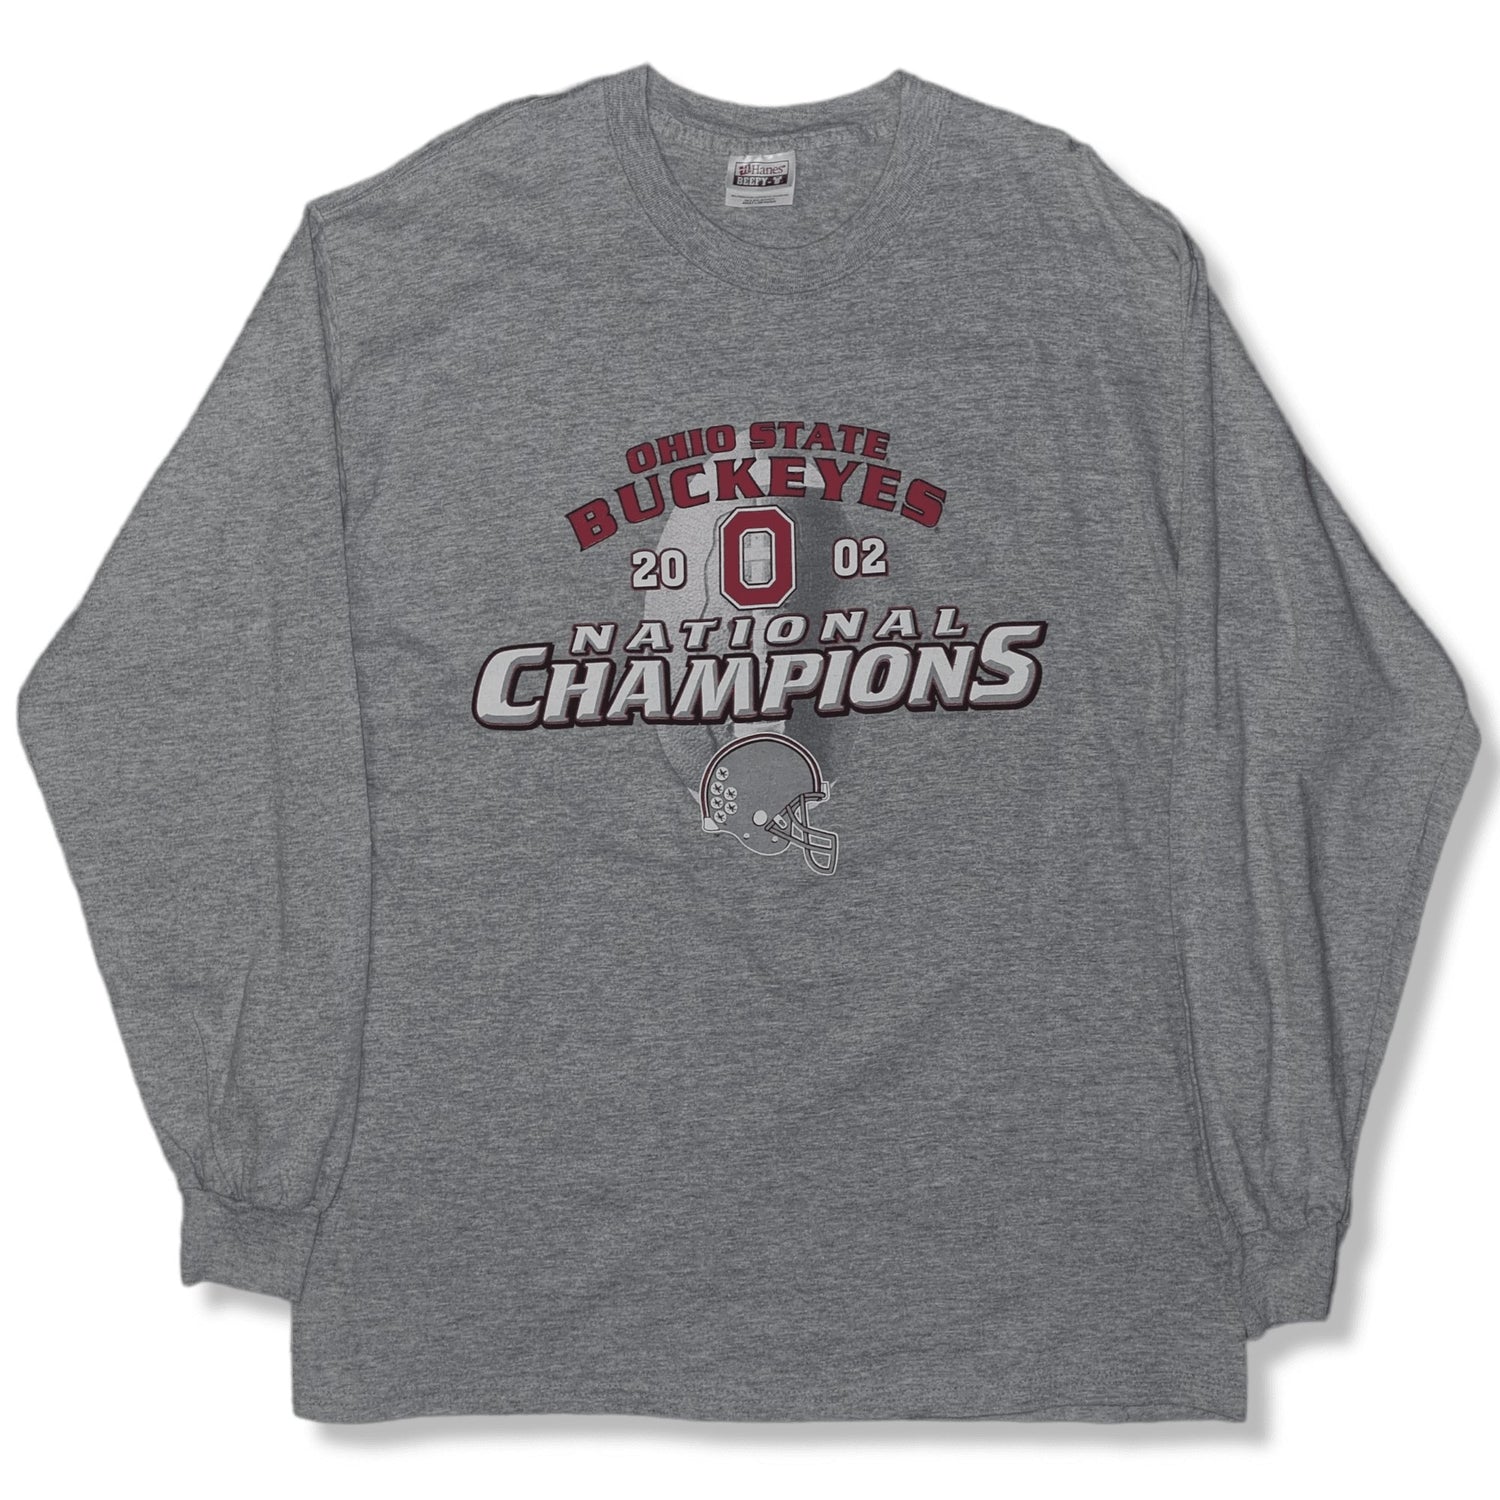 Maglia Ohio State Buckeyes (L) - oldstyleclothing